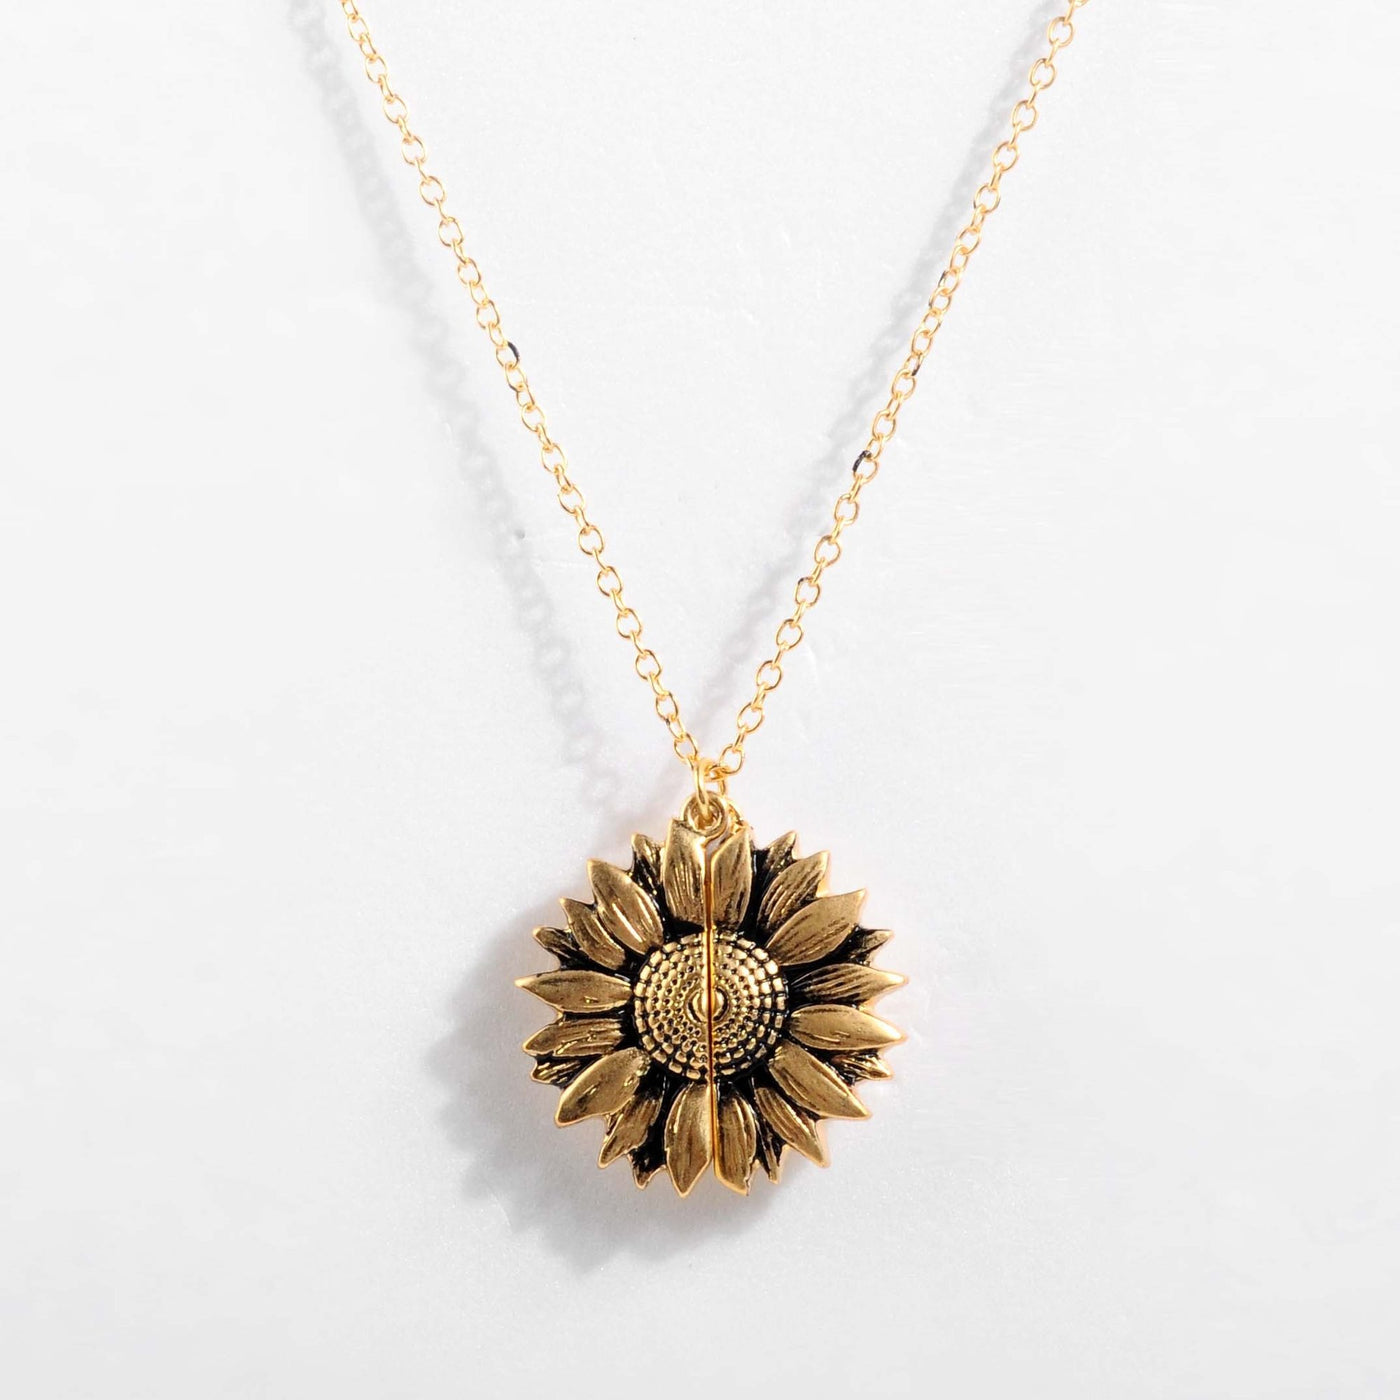 "YOU ARE MY SUNSHINE" Sunflower Necklace